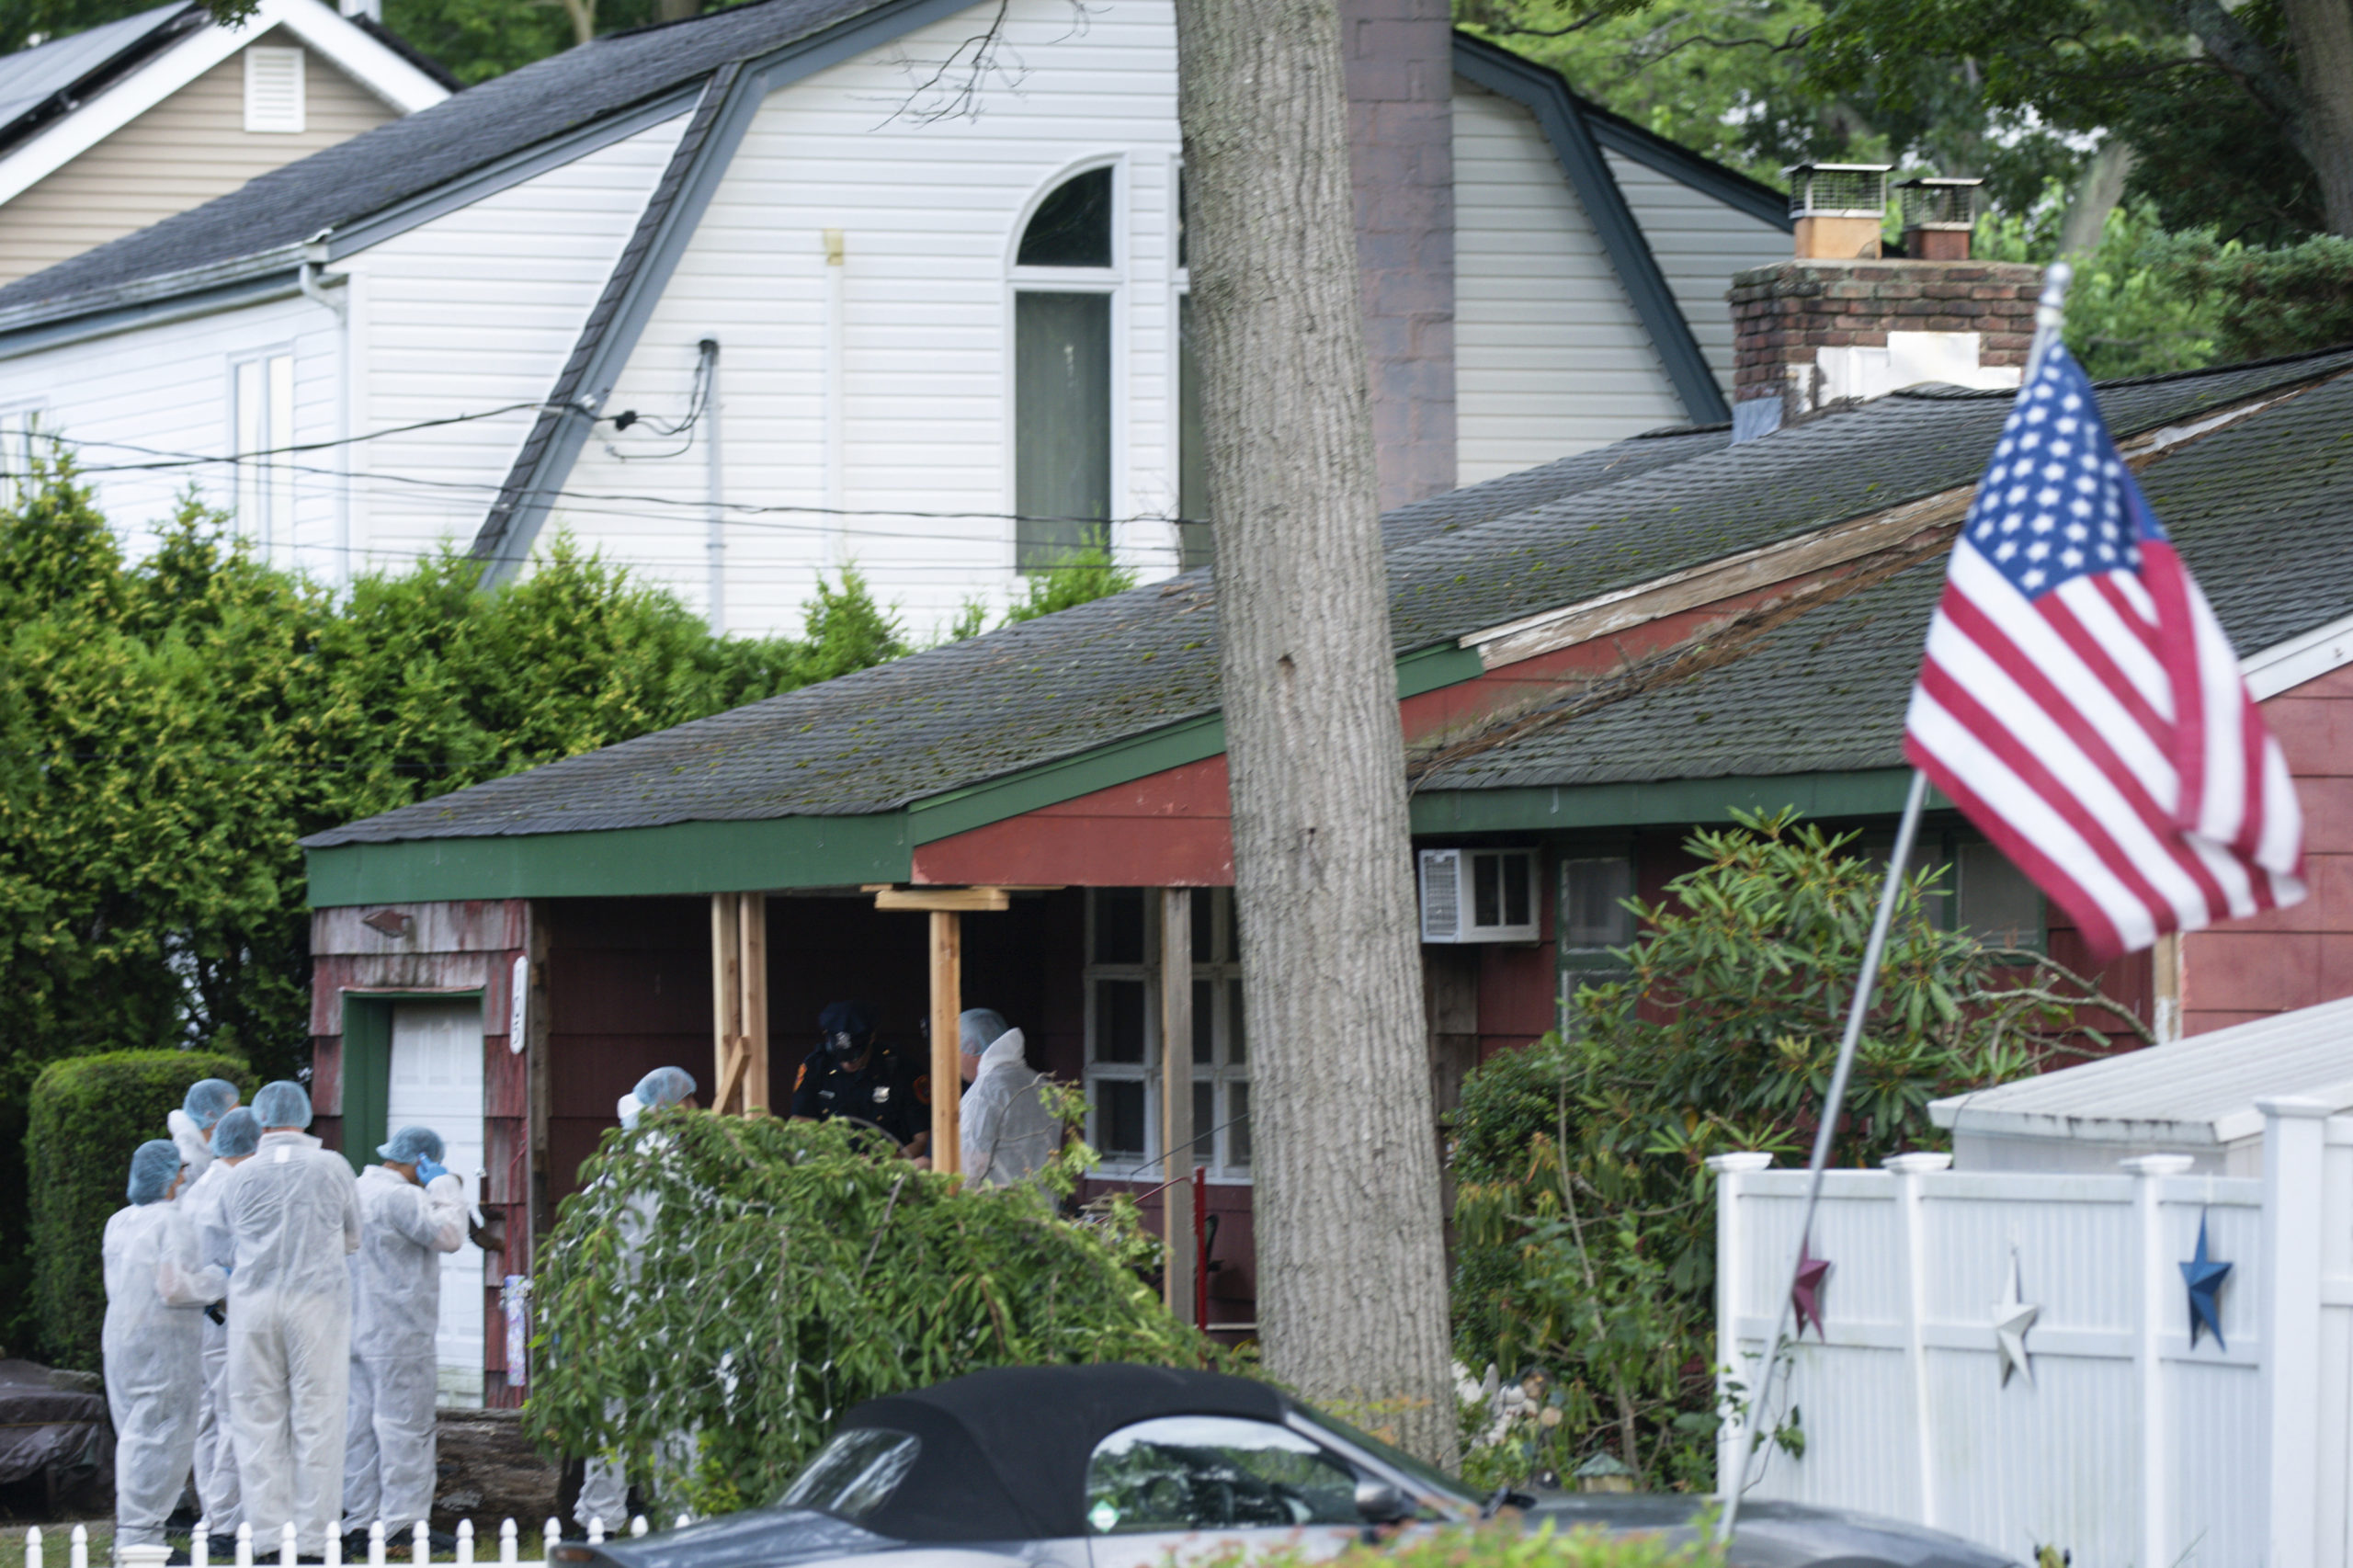 Crime laboratory officers arrive Friday at the house where a suspect was taken into custody on New York's Long Island in connection with a long-unsolved string of killings known as the Gilgo Beach murders.